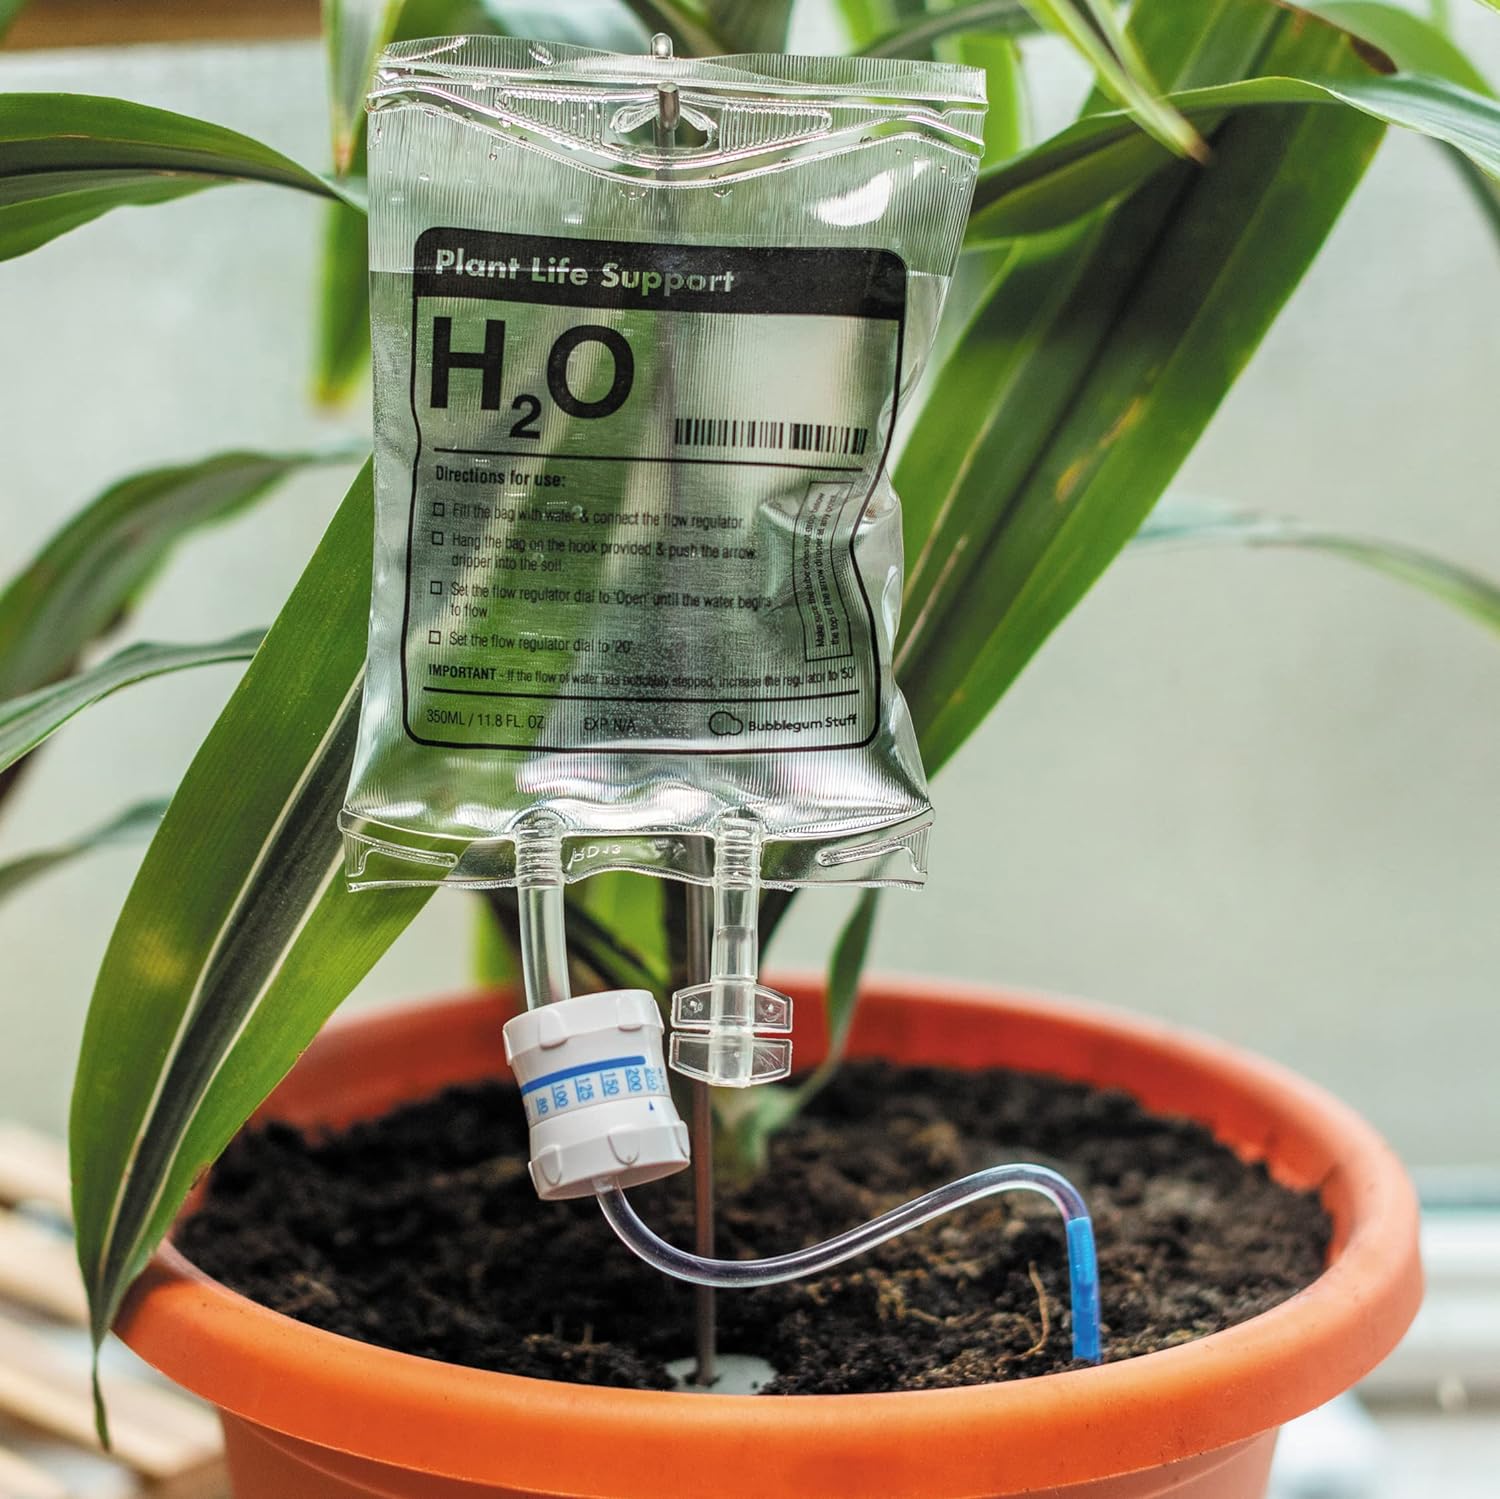 Plant Life Support - Automatic Self Watering System for House Plants